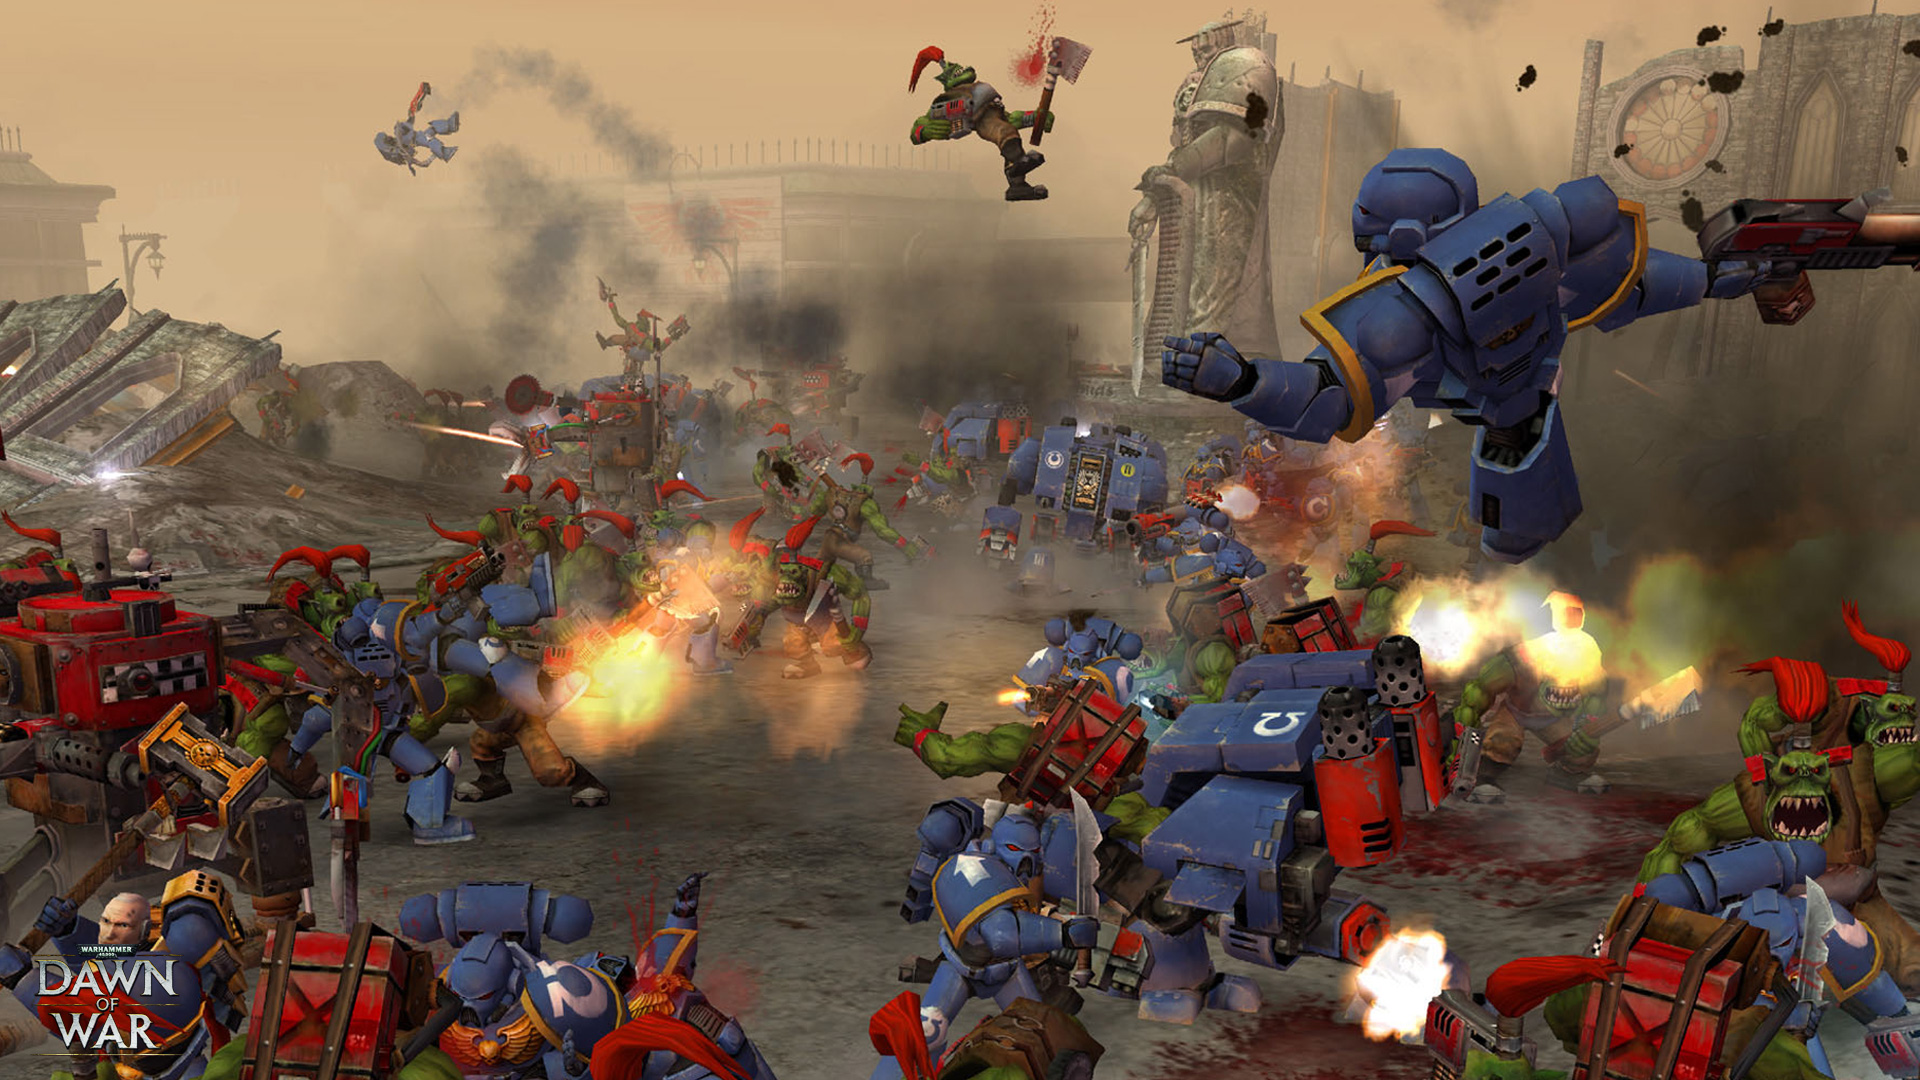 Dawn of War featured large scale battles and combat animations